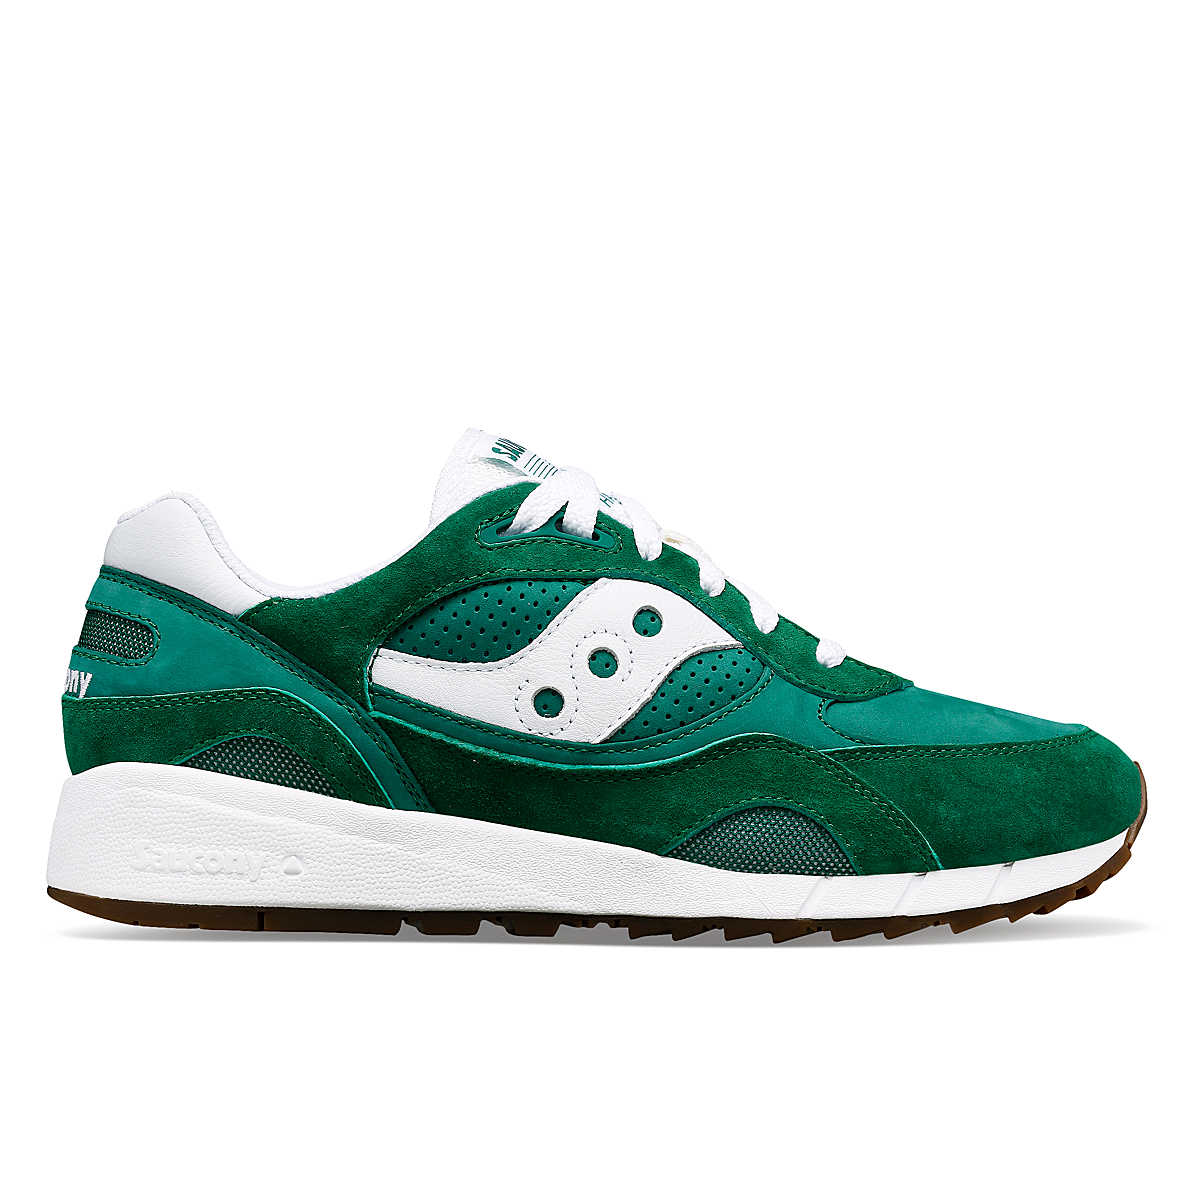 Saucony shadow 6000 green/White